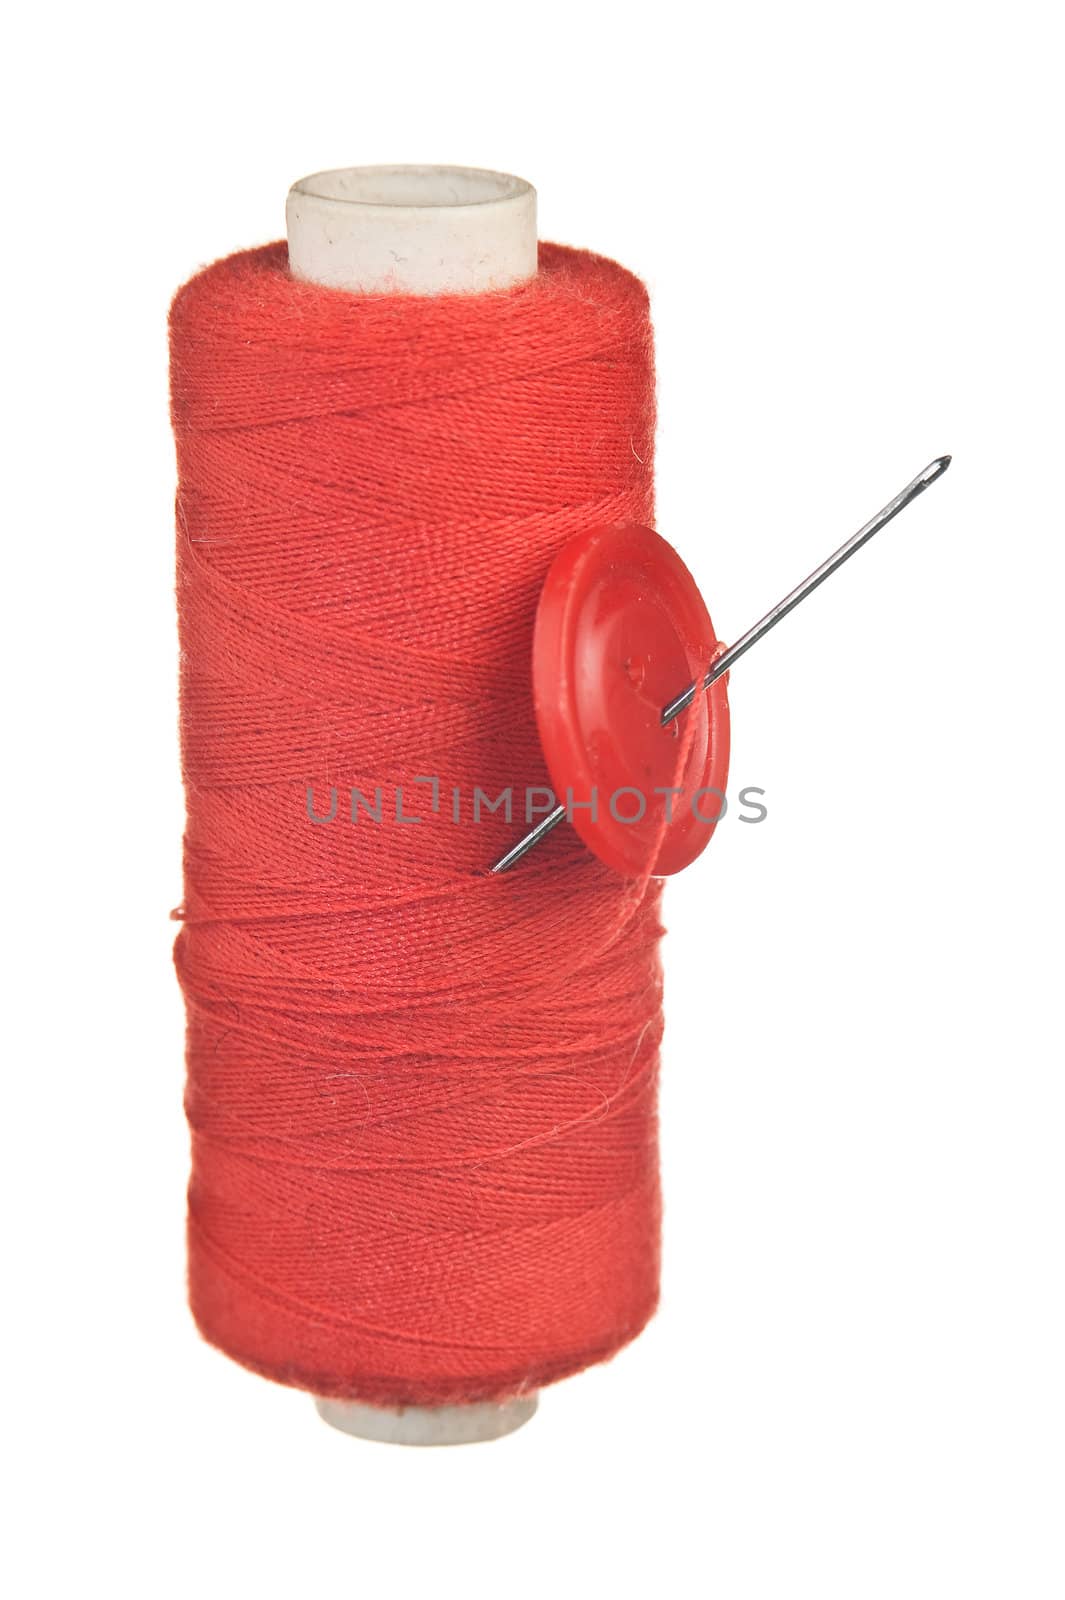 Button with a needle on spool of thread by oleg_zhukov